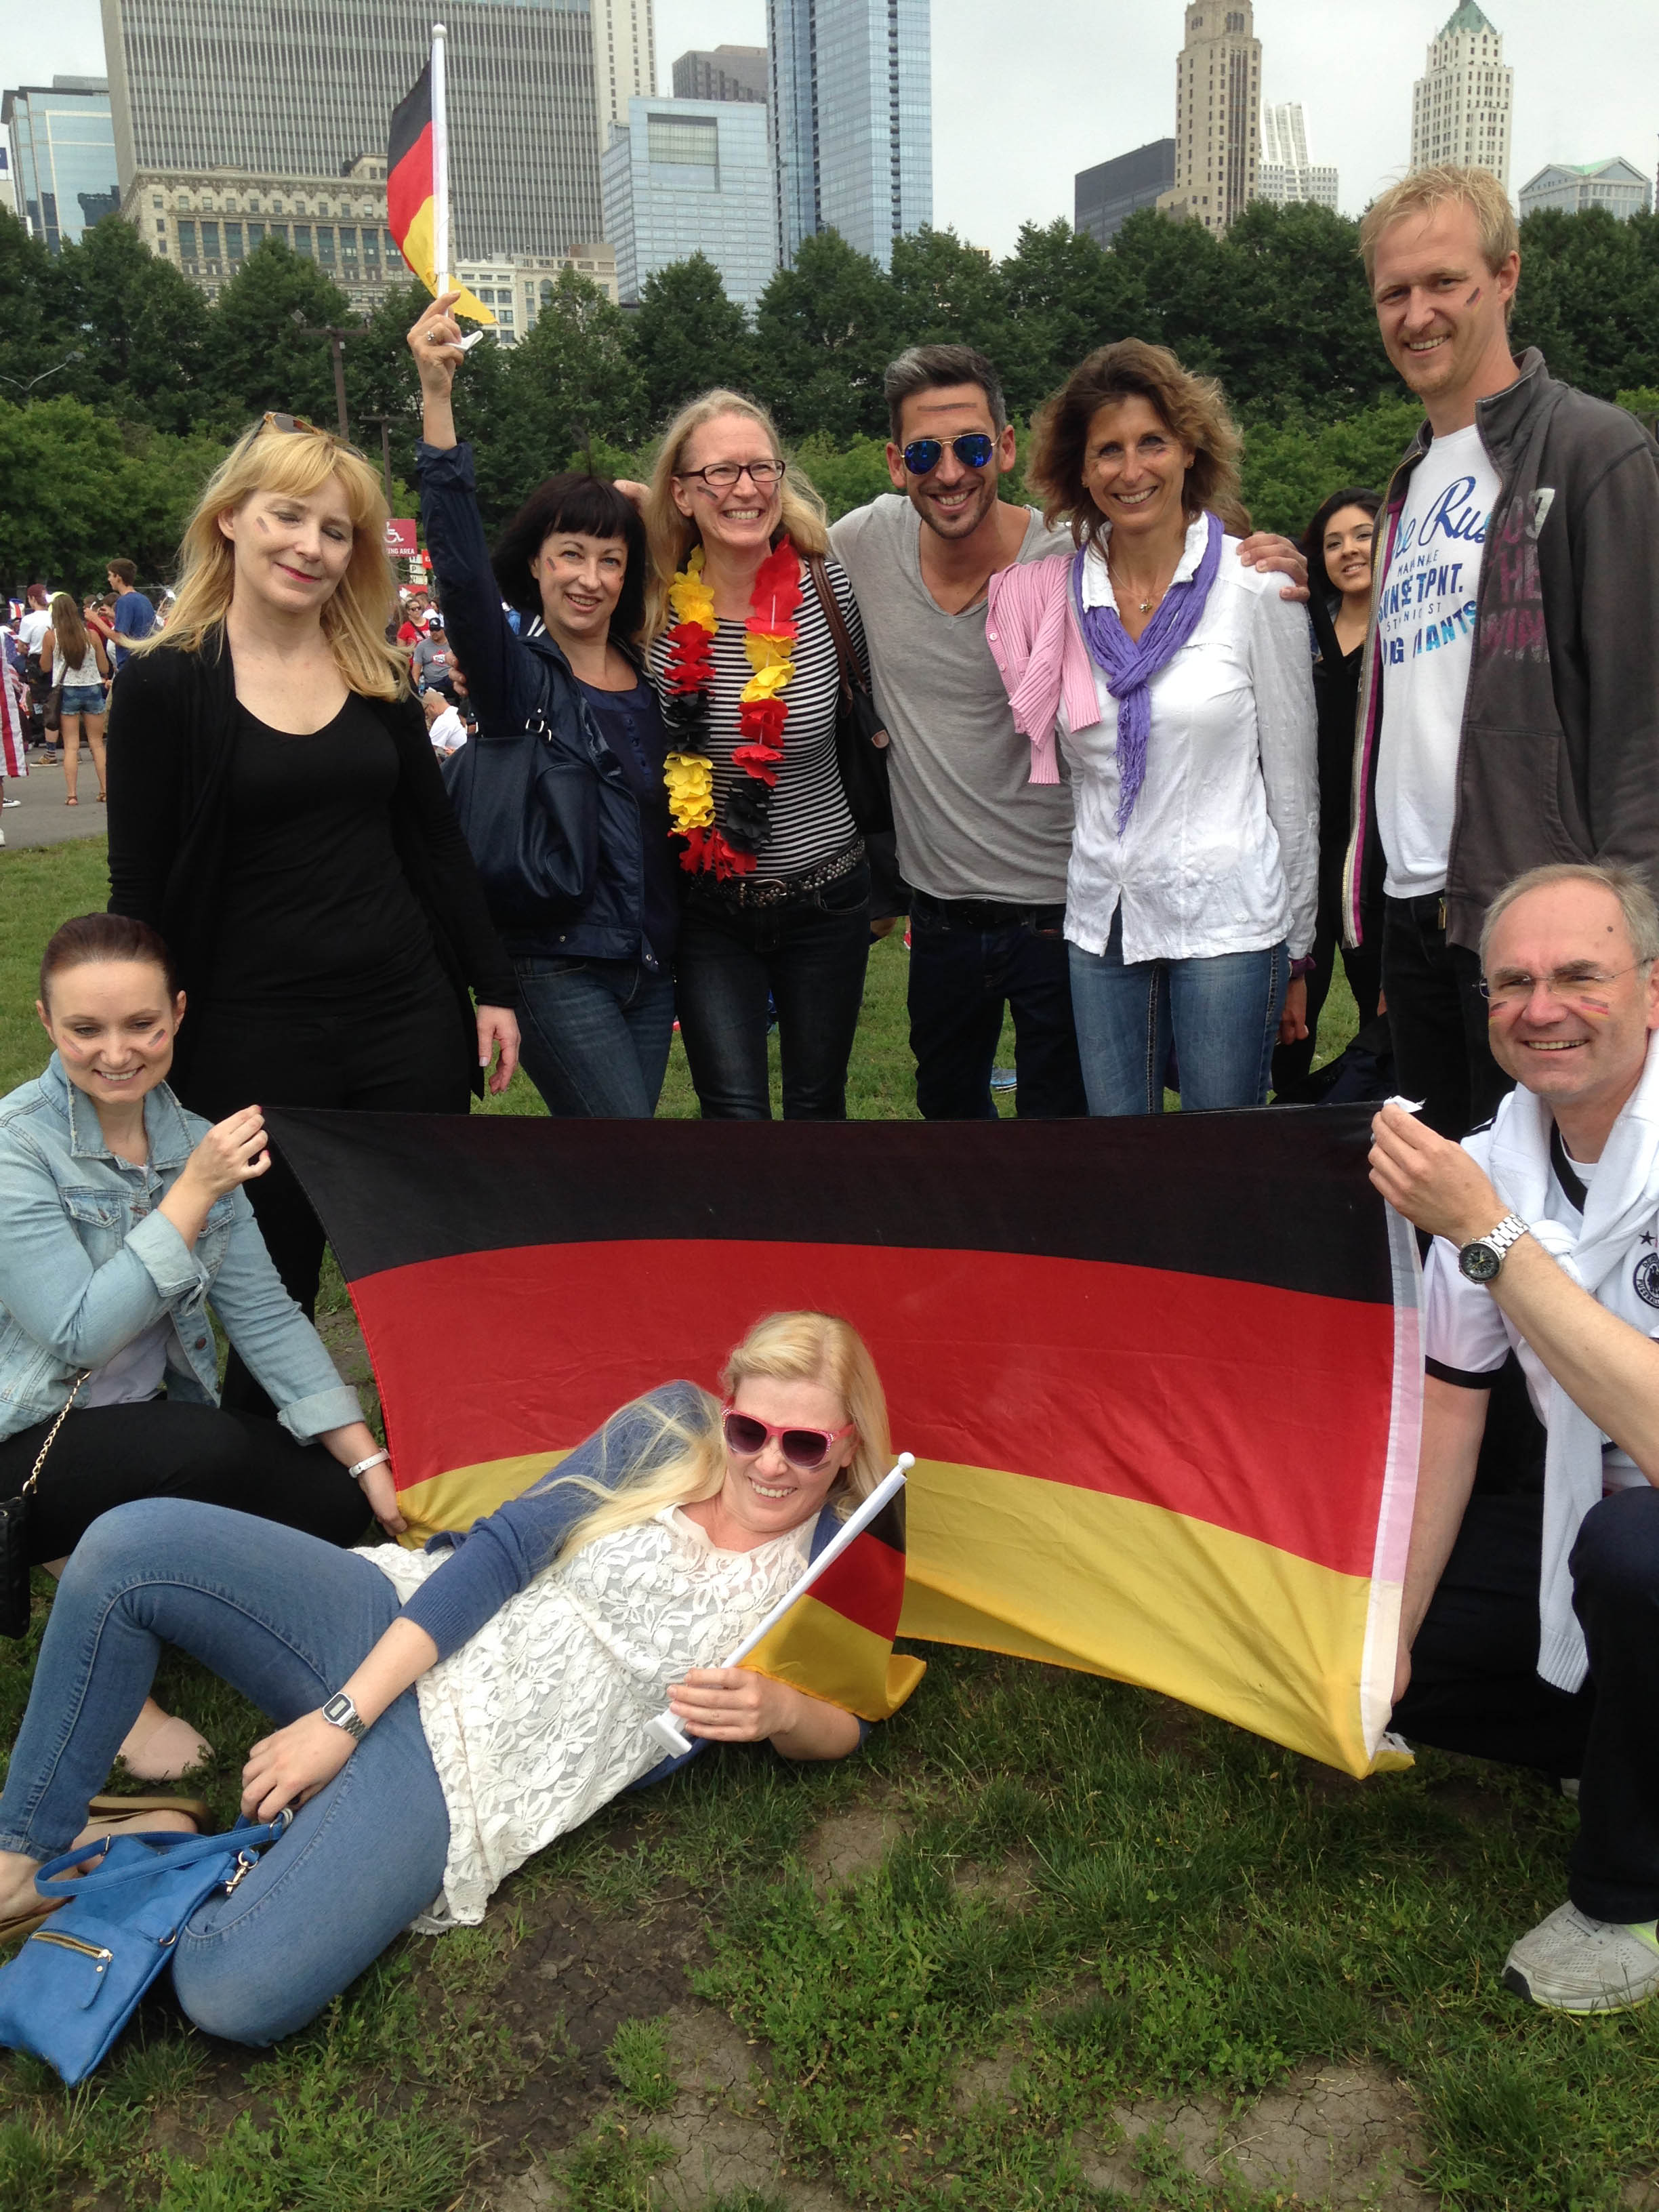 A Lufthansa flight crew on a layover in Chicago visited Grant Park to cheer on Germany against Team USA in World Cup soccer. (Credit: Regine Schlesinger/CBS)